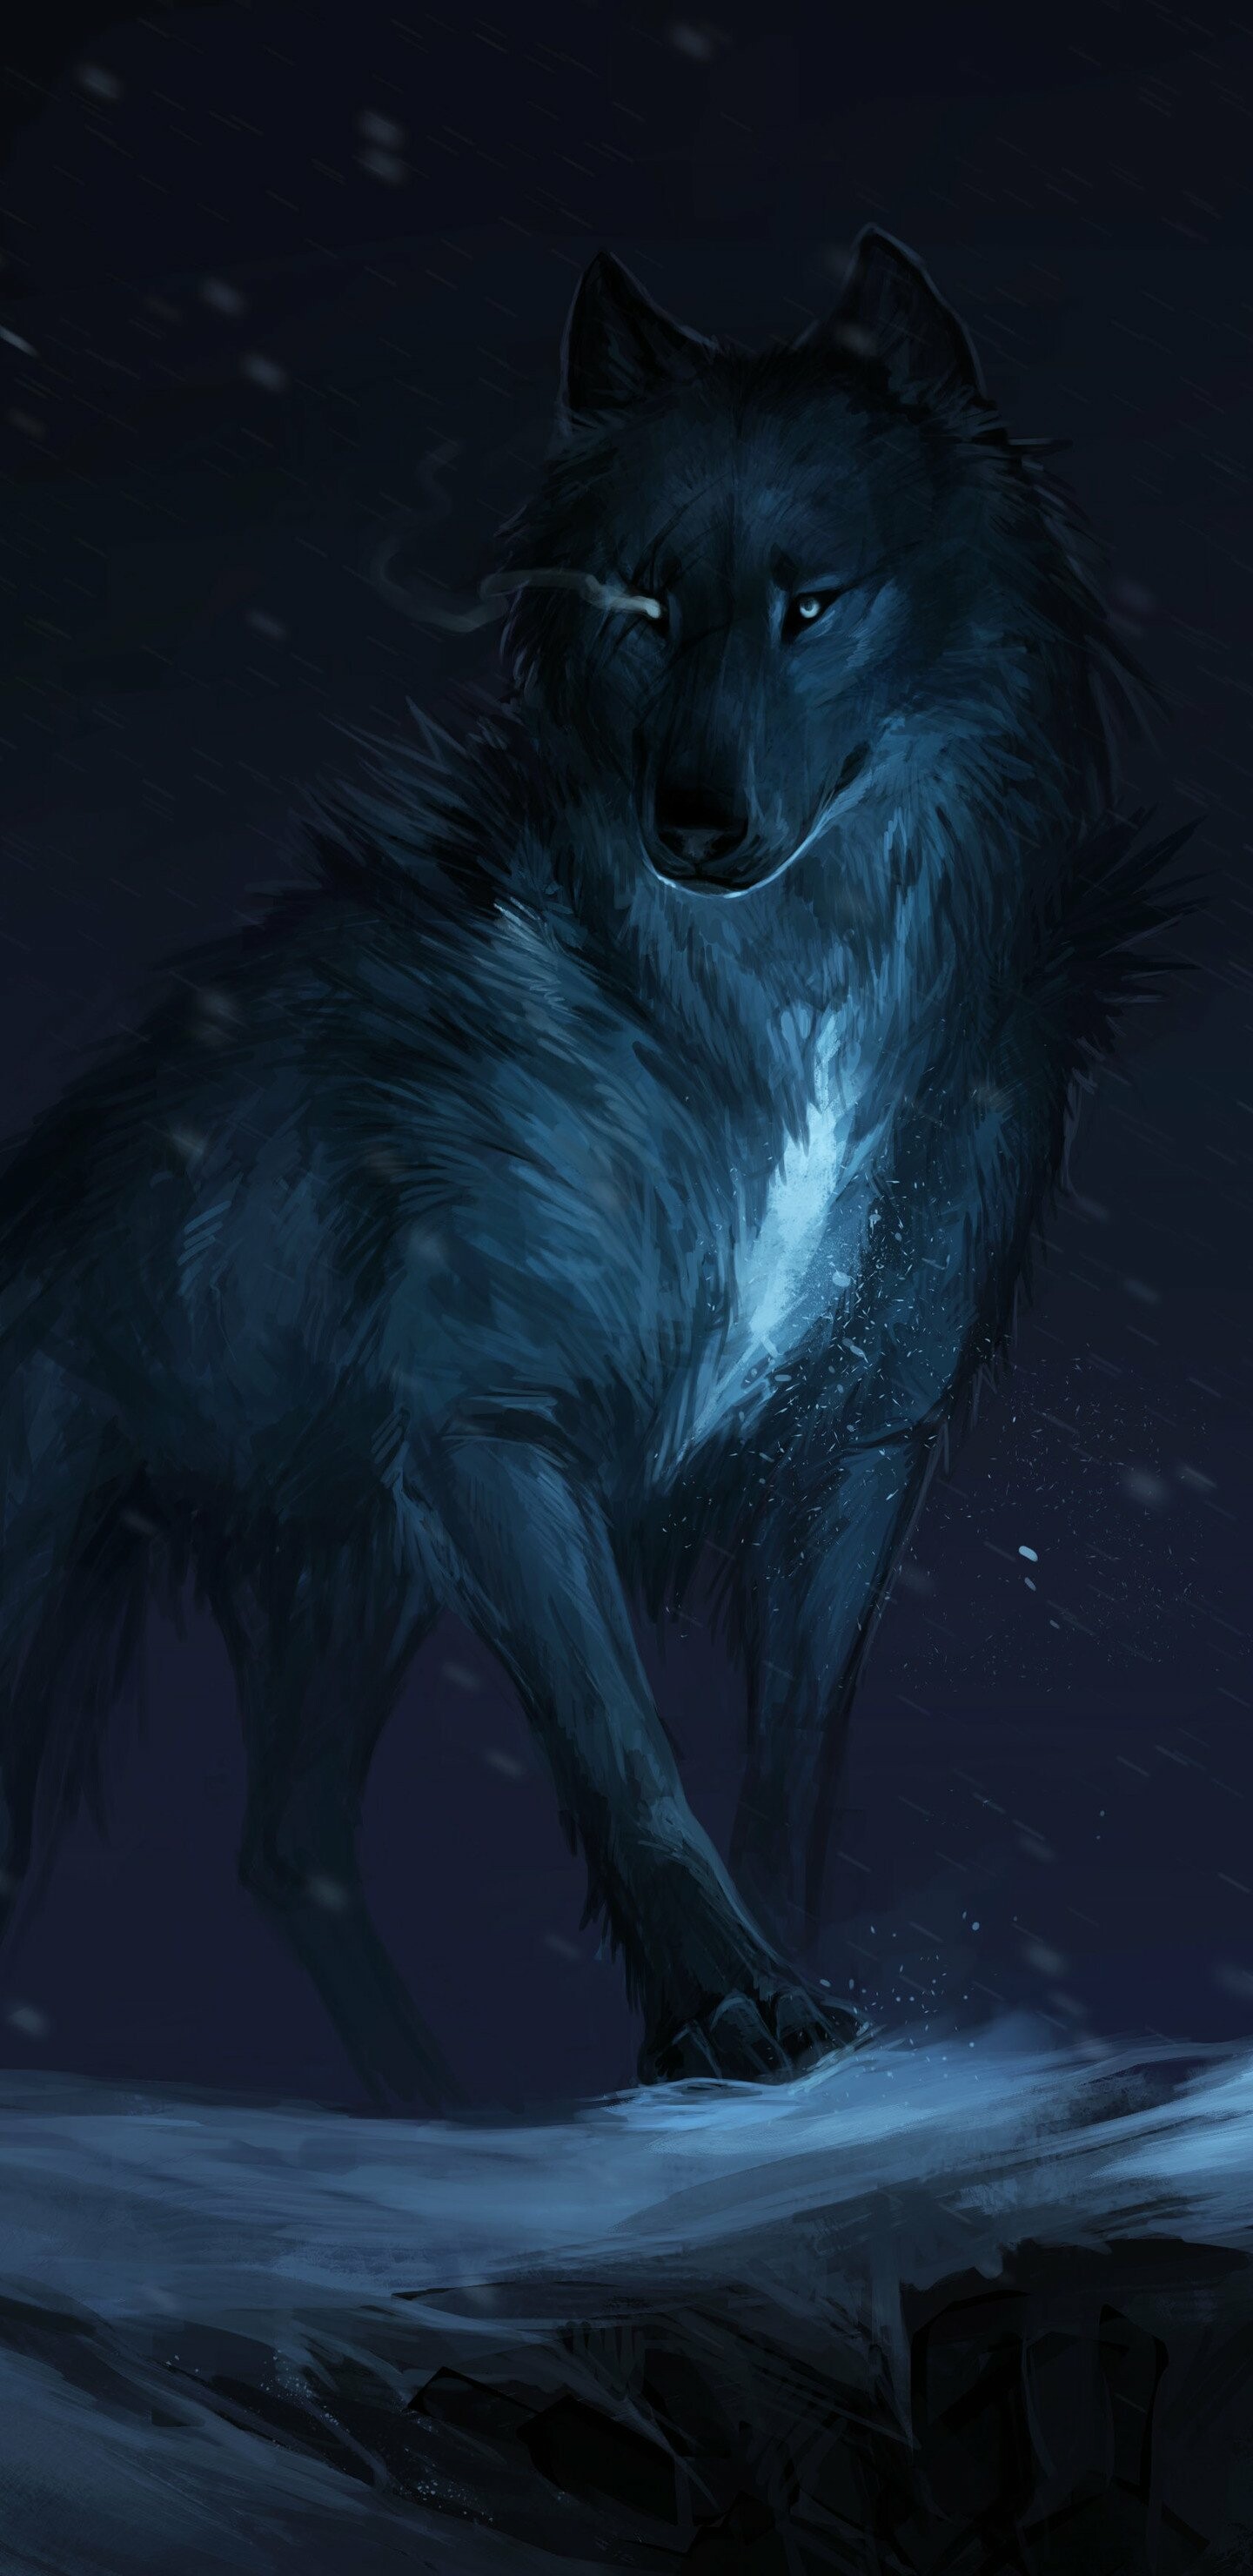 Wolf: Females tend to have narrower muzzles and foreheads, thinner necks, slightly shorter legs, and less massive shoulders than males, Art, Painting, Canis lupus. 1440x2960 HD Wallpaper.